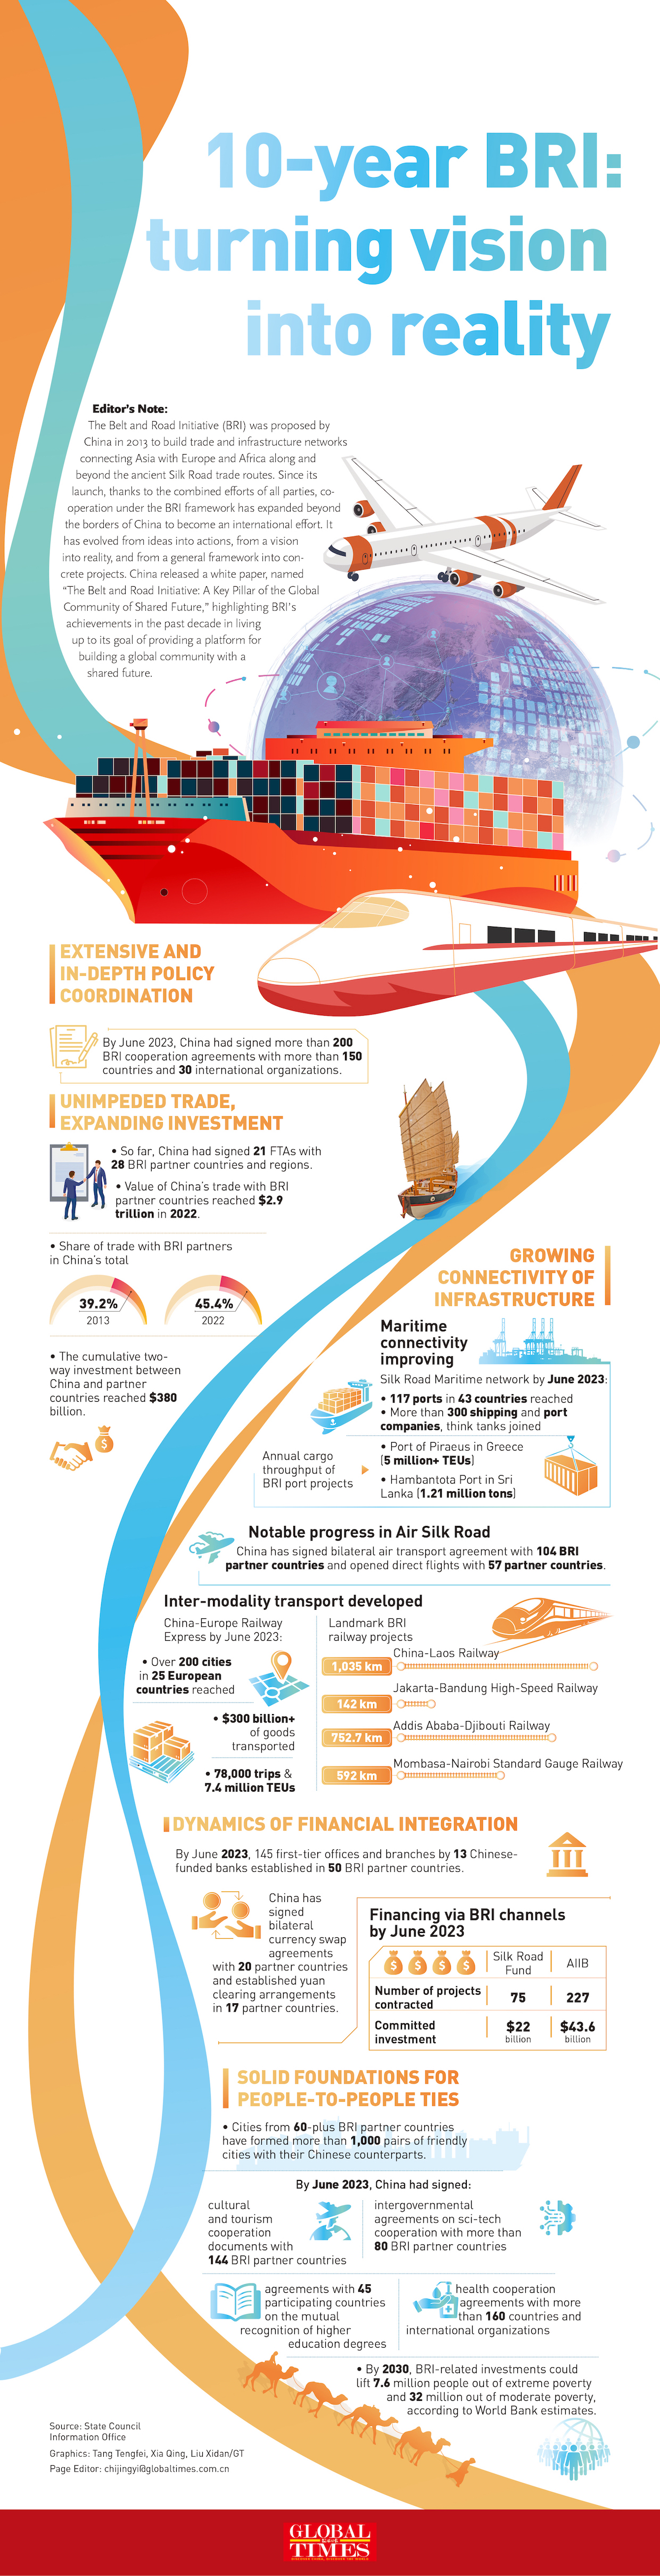 BRI, turning a global community of shared future from vision to action Infographic: GT